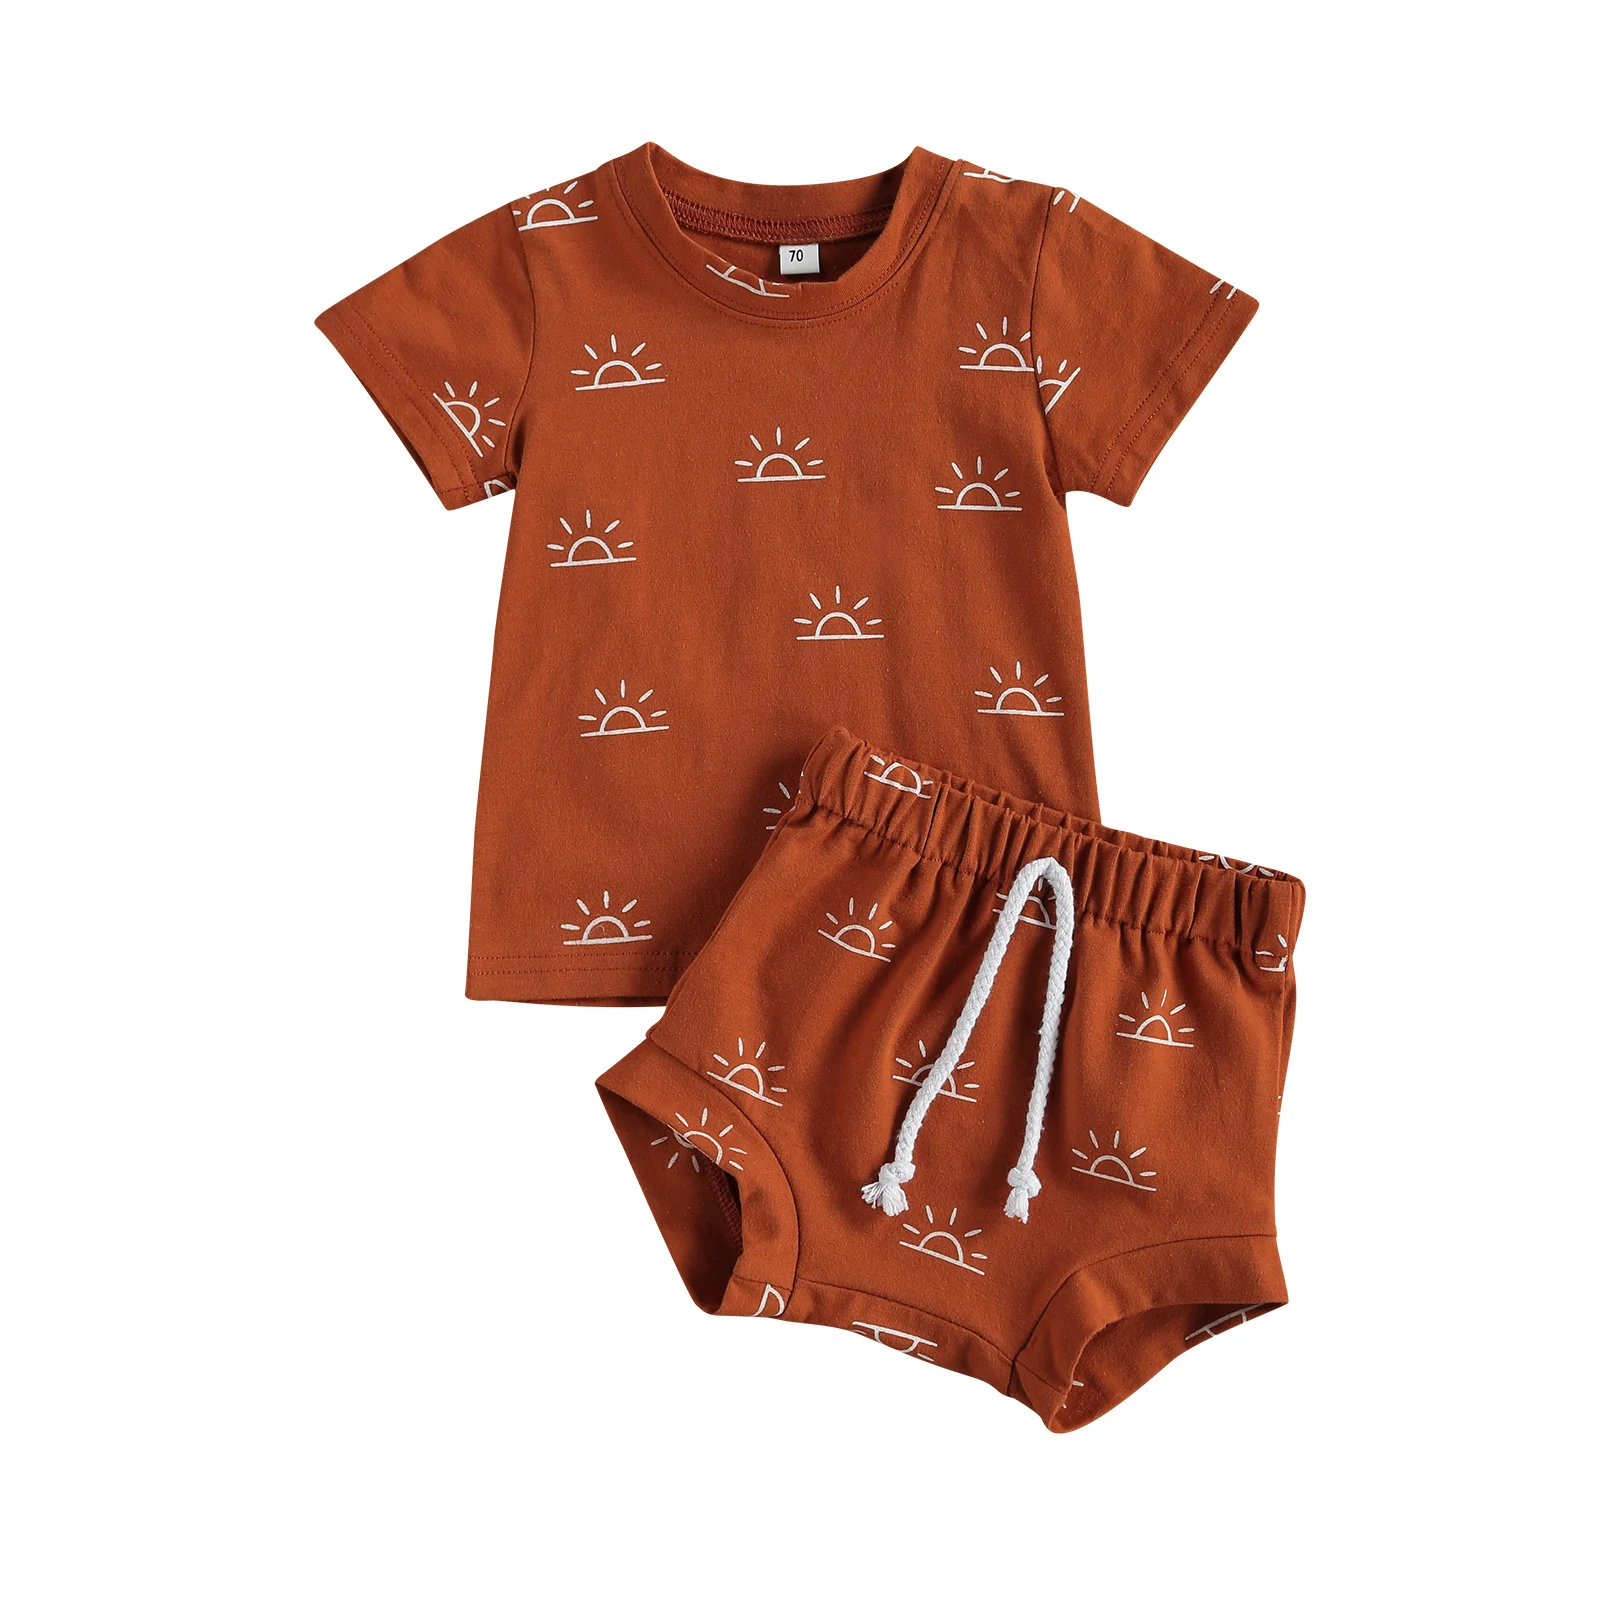 baby clothing set essentials Newborn Infant Baby 2pcs Summer Outfit Casual Set Short Sleeve Sun Print Tops+Shorts Set for Kids Boys Girls Home Wear sun baby clothing set